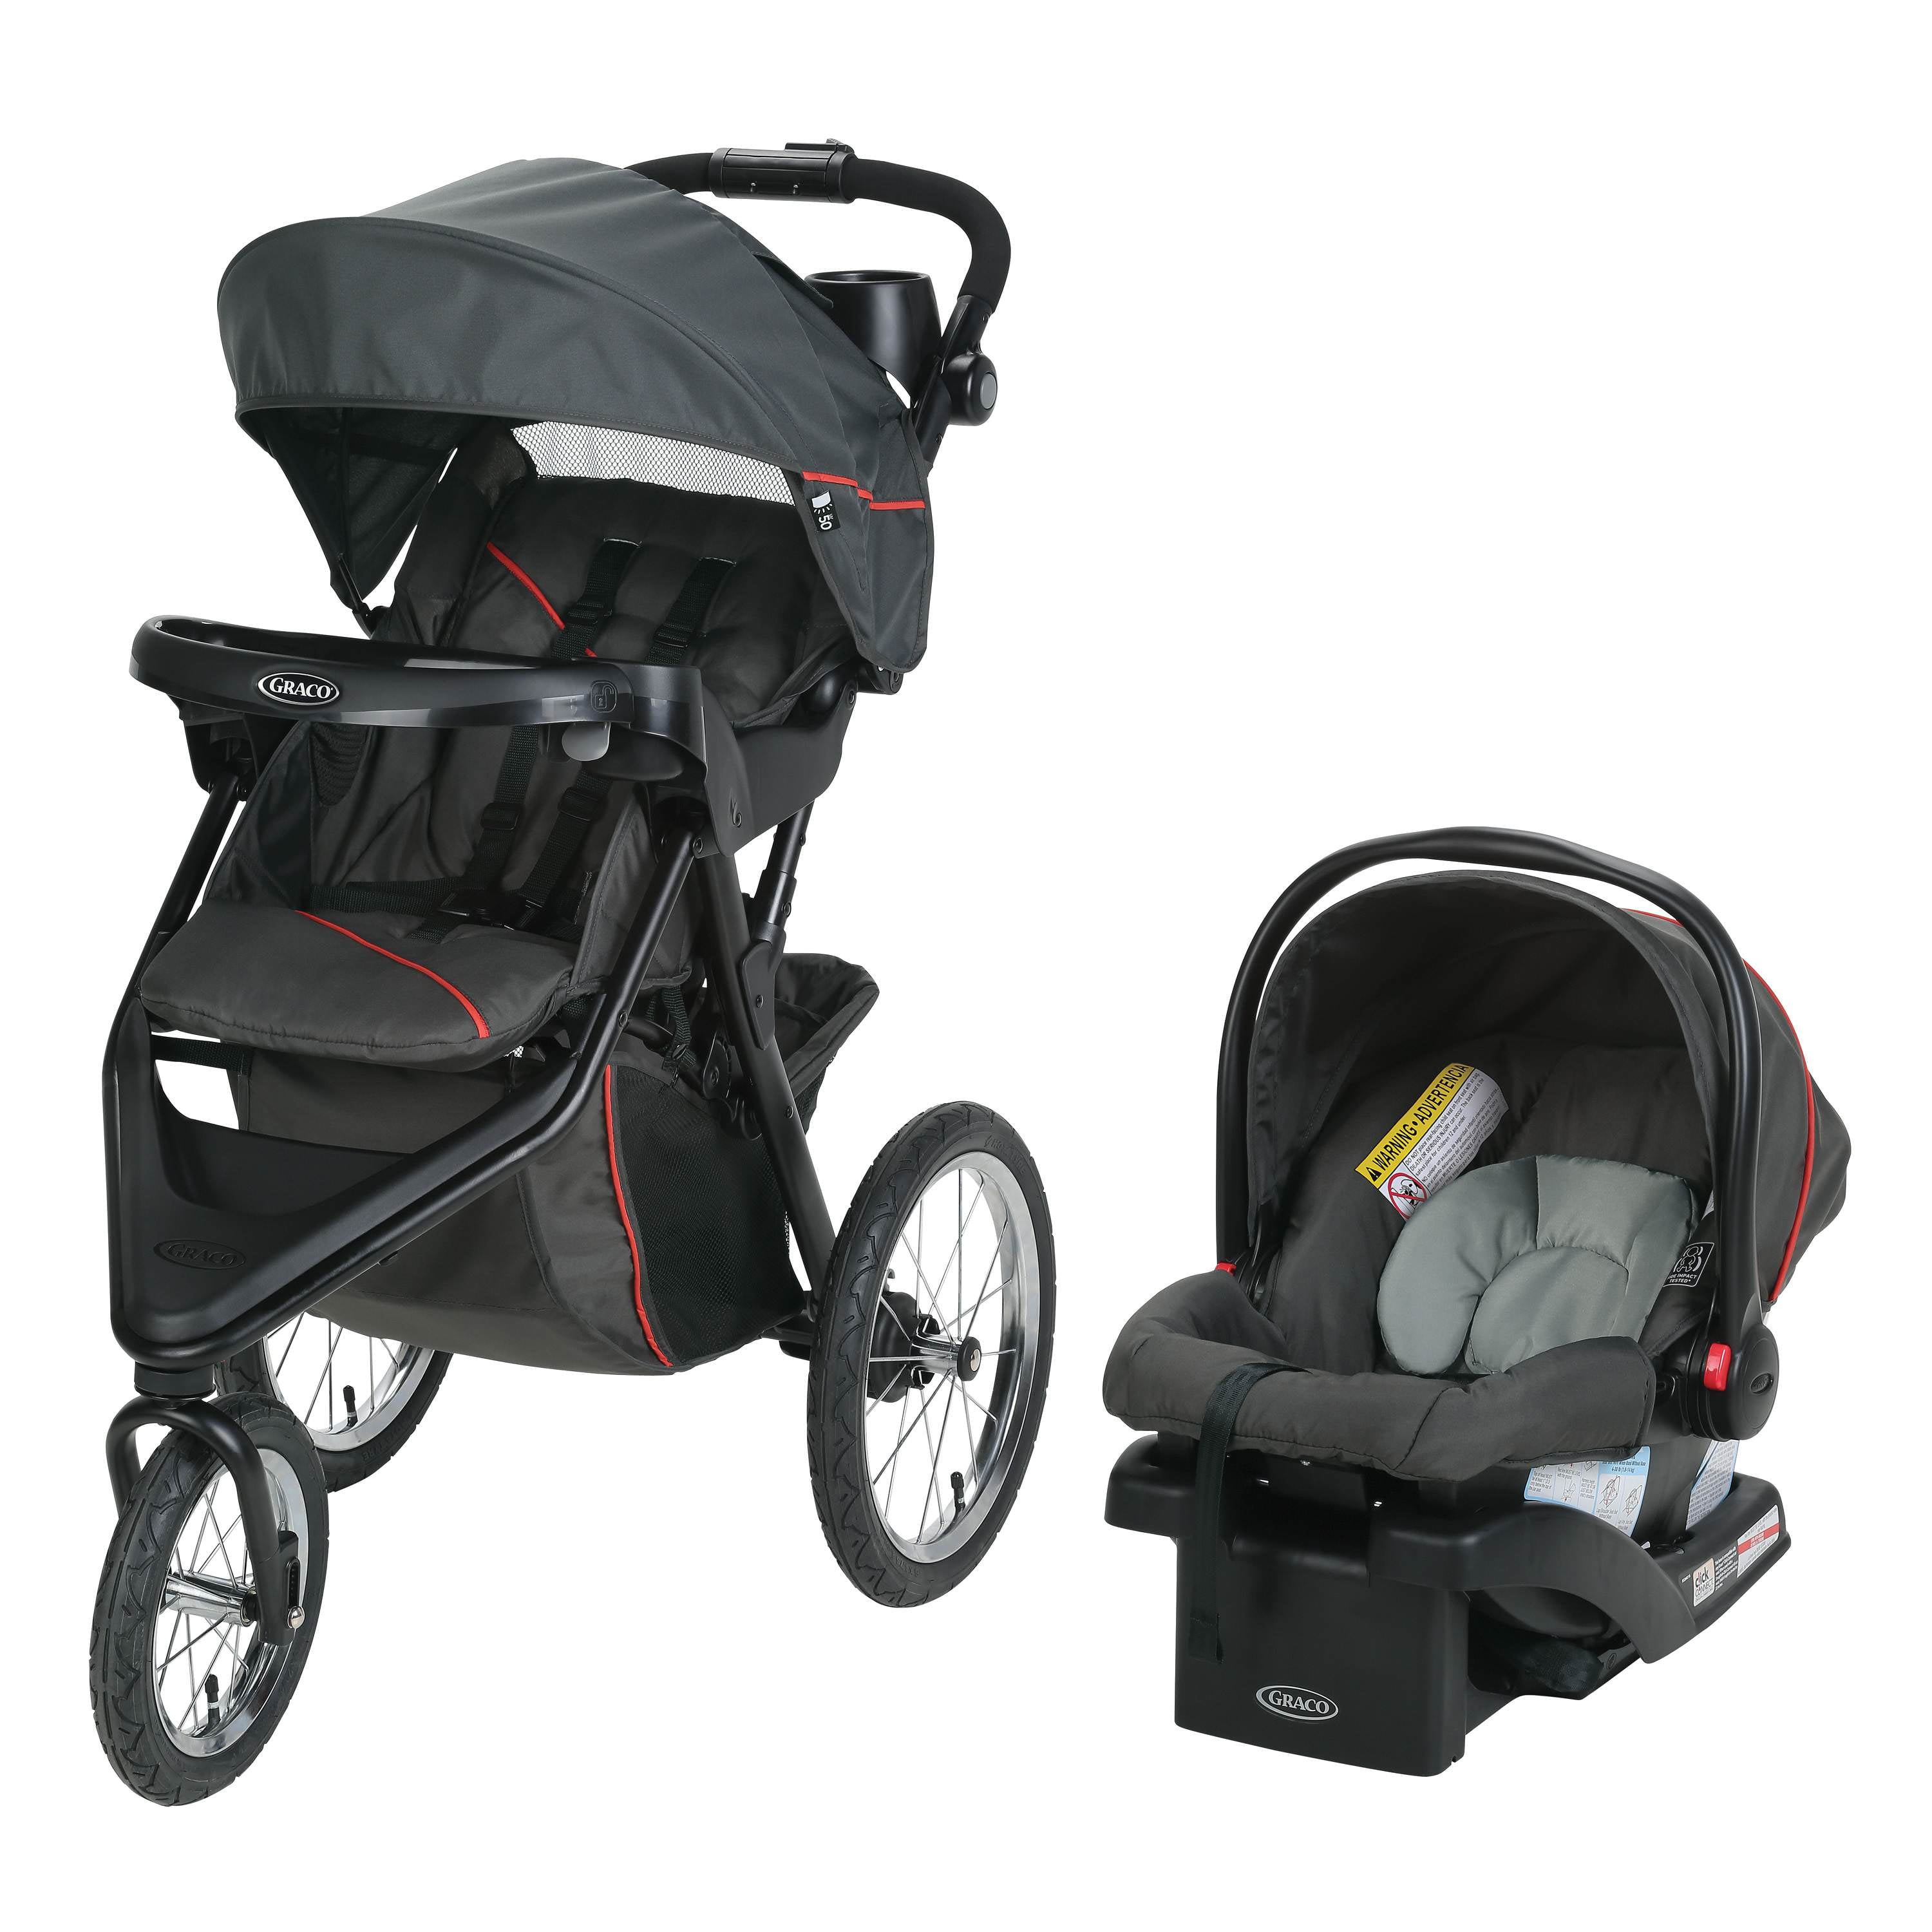 Graco Baby Modes 3 Lite DLX Travel System Stroller with Infant Car Seat Arbis 